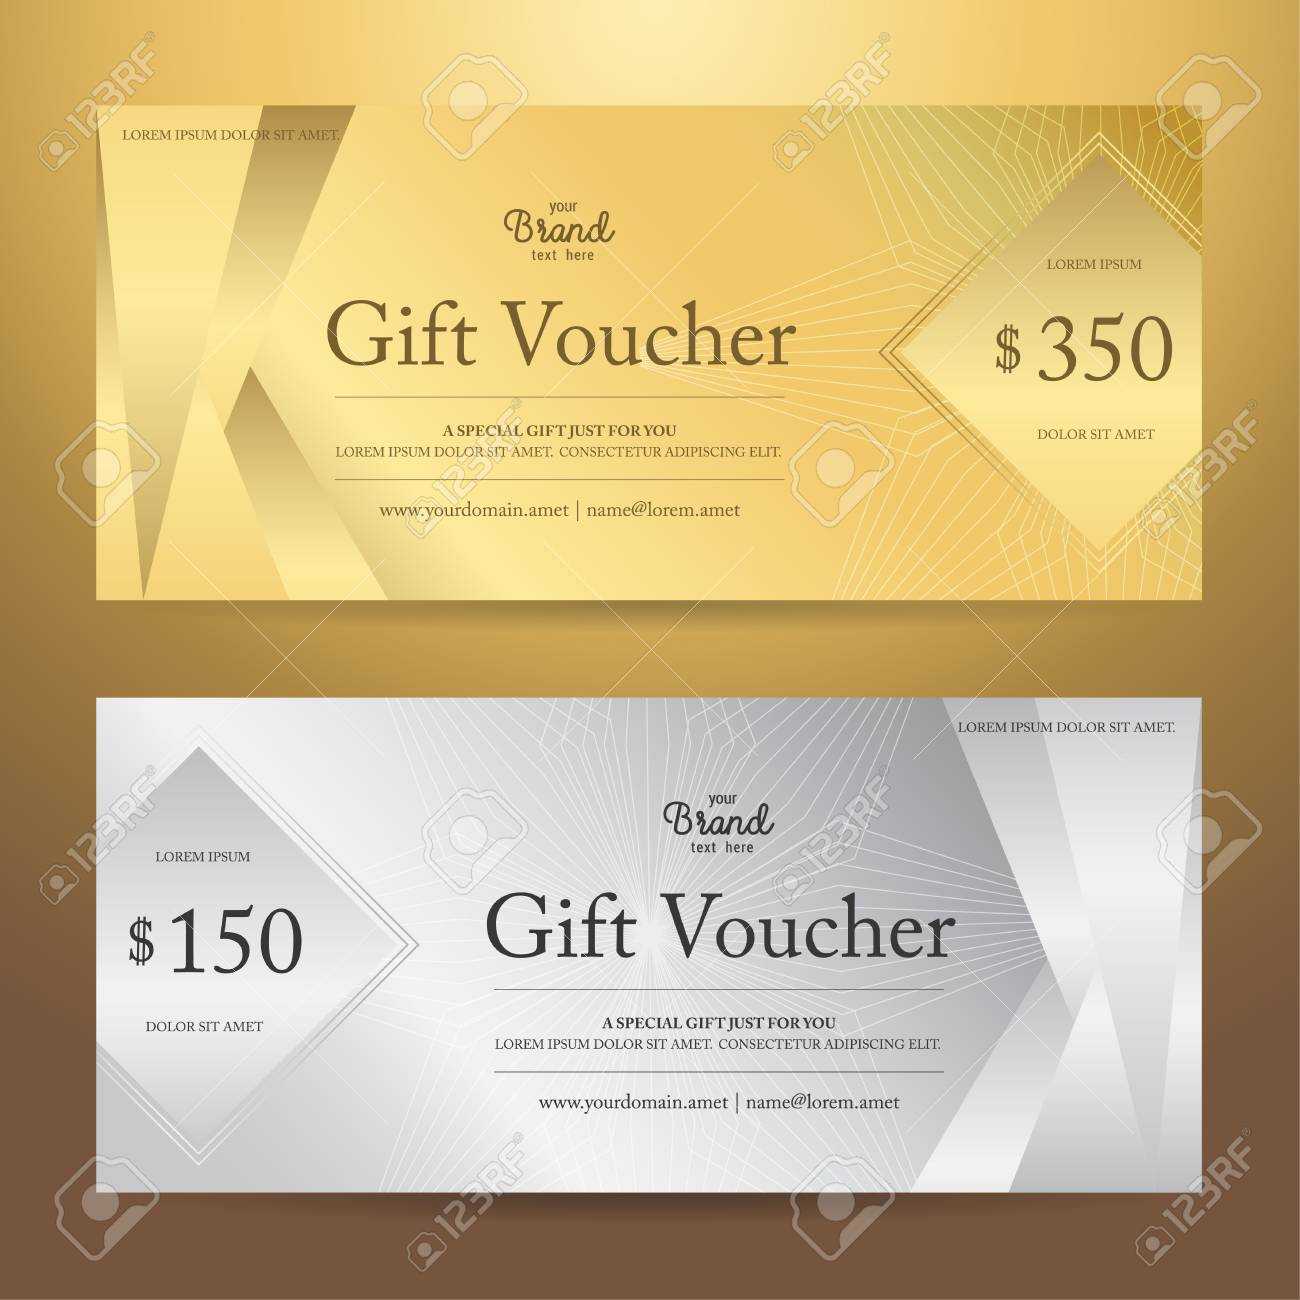 Elegant Gift Voucher Or Gift Card Or Coupon Template For Discount.. Intended For Elegant Gift Certificate Template